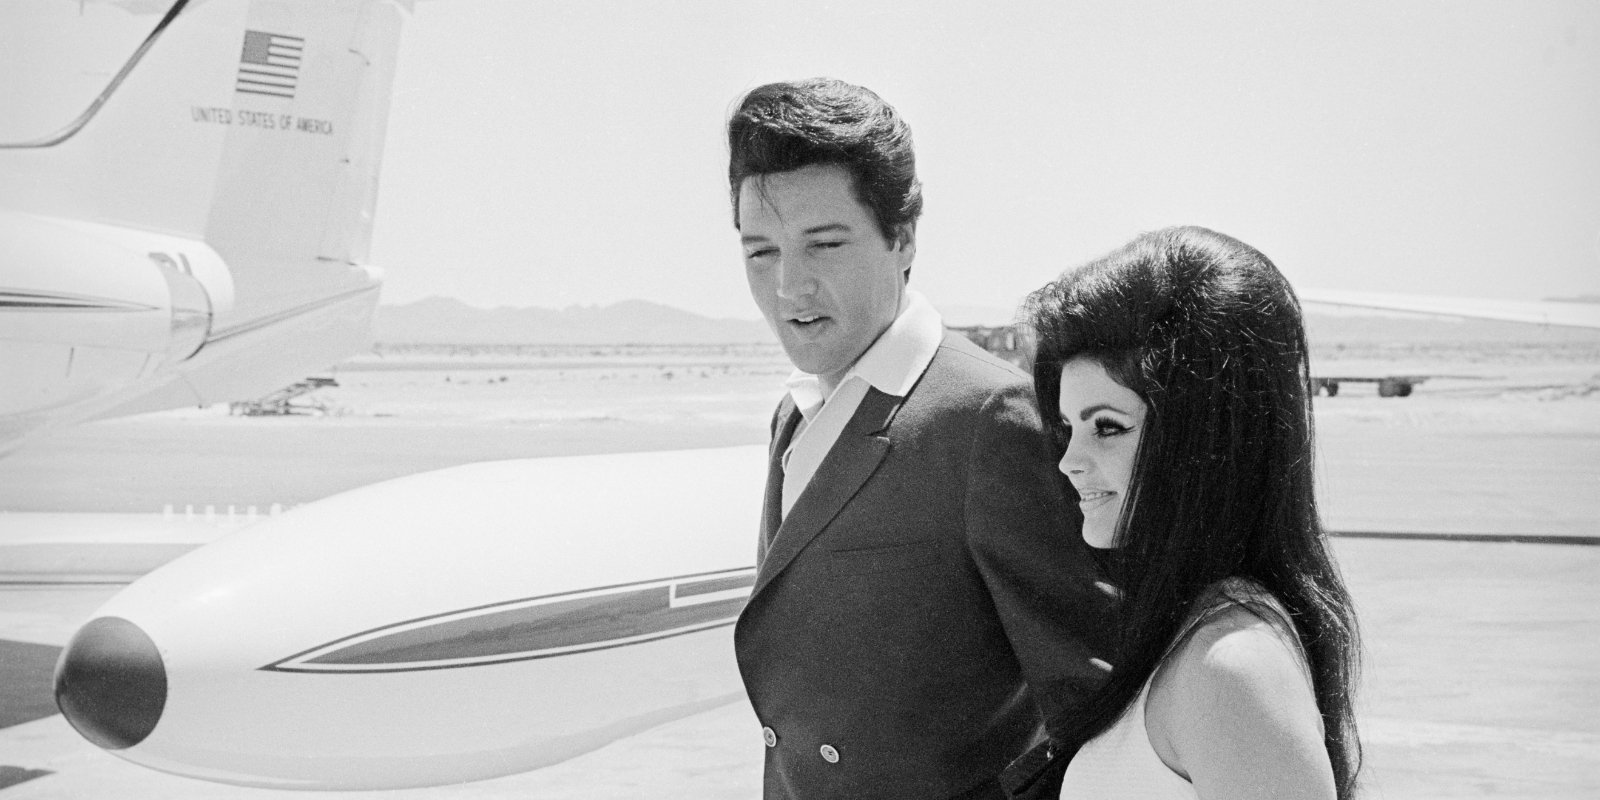 Elvis and Priscilla Presley photographed approaching an airplane.